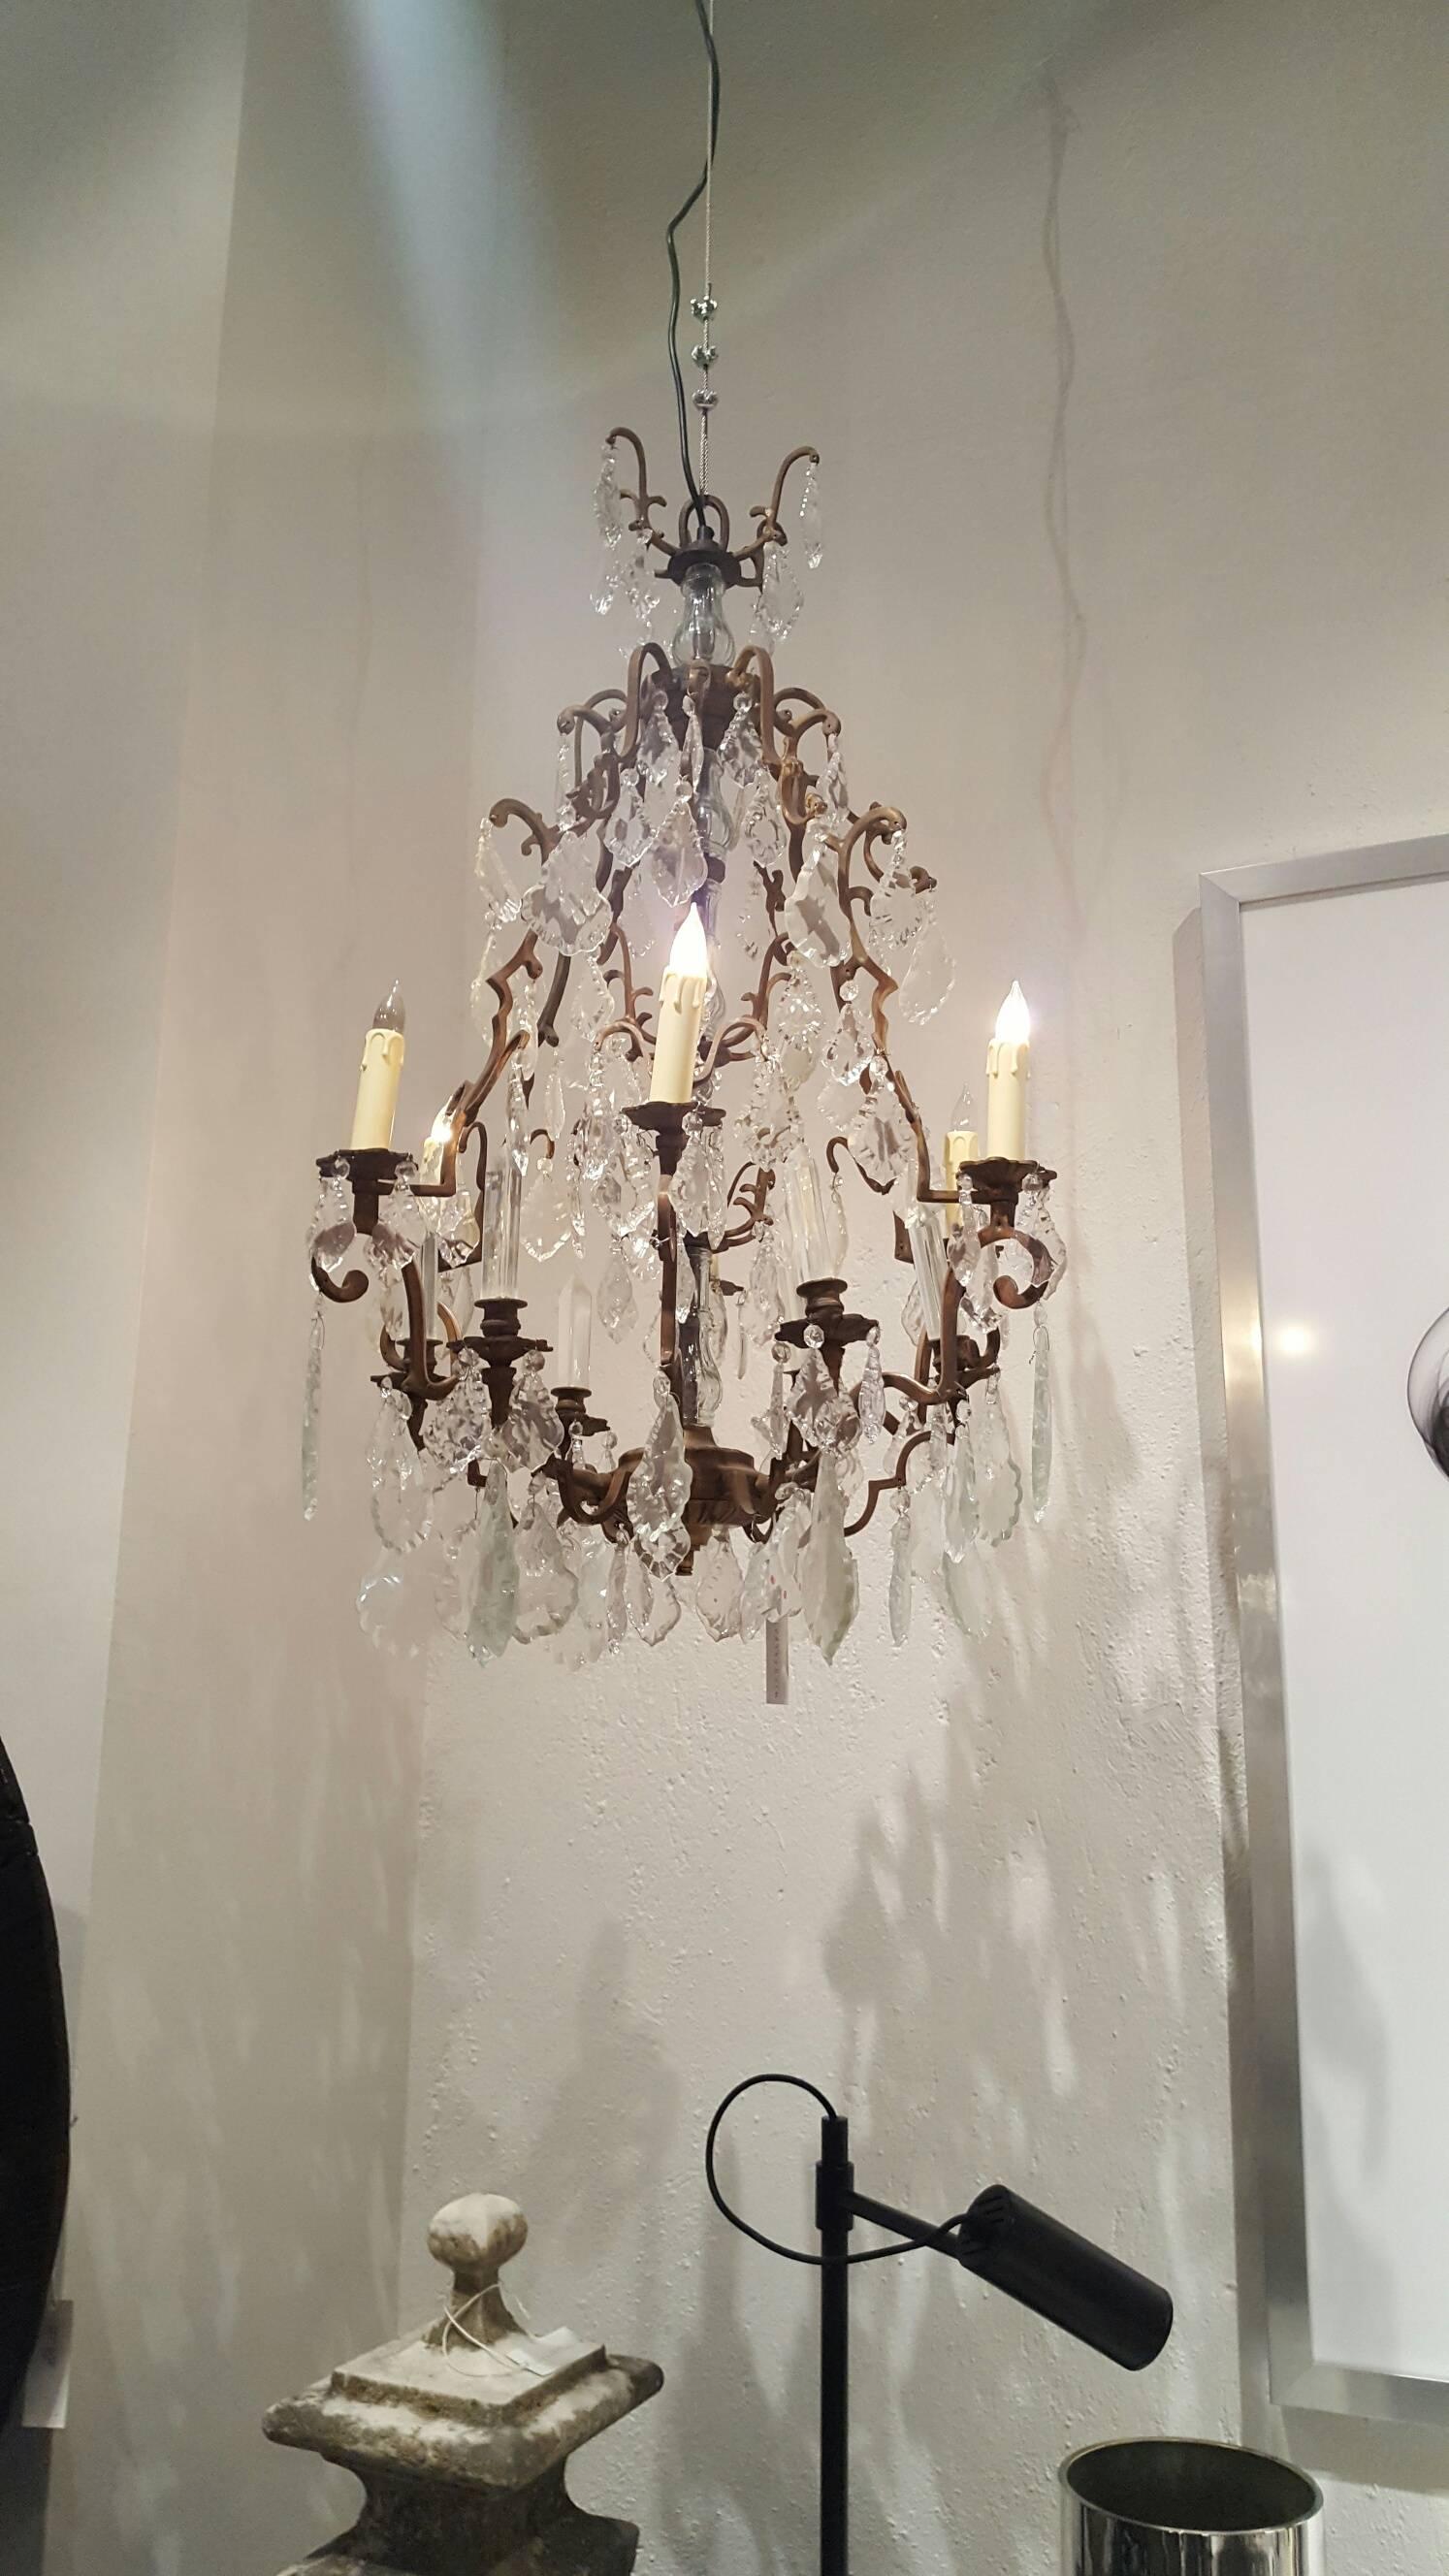 Beautiful Chateau chandelier
in antique brass finish.